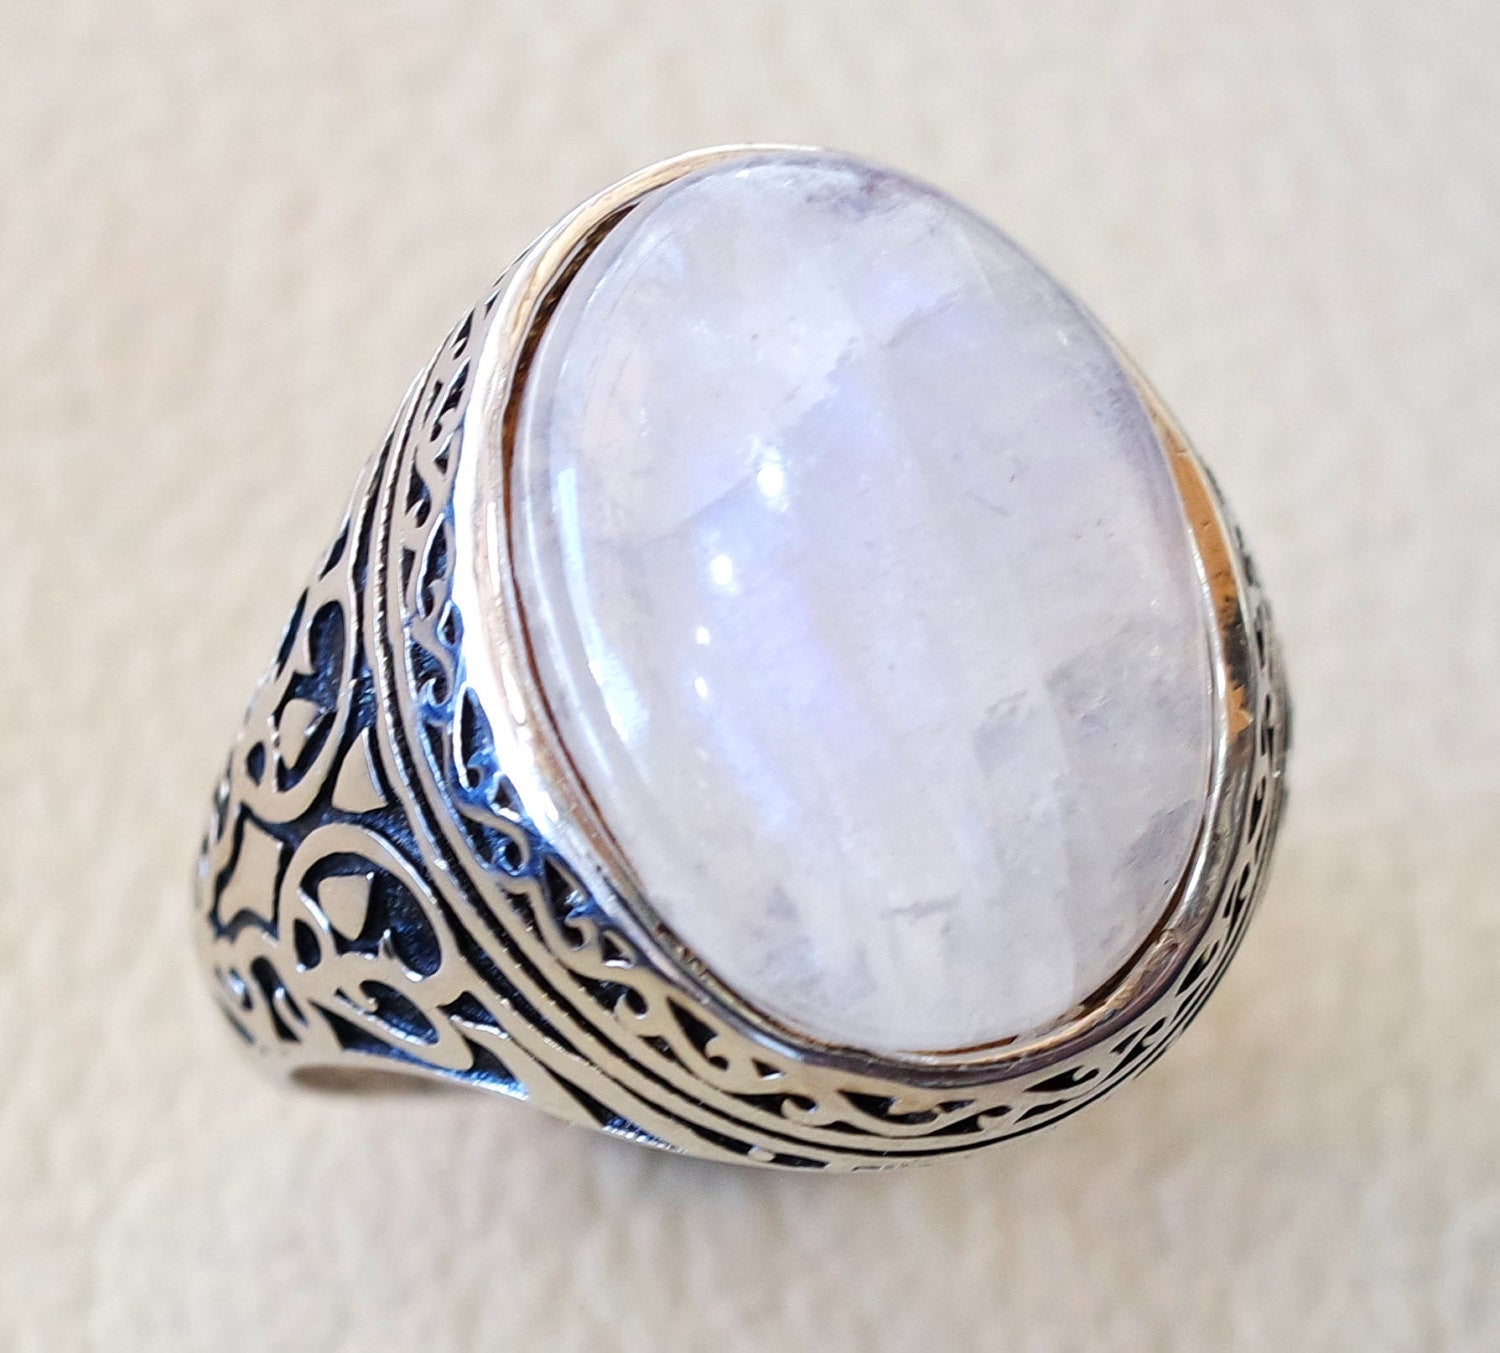 moonstone natural stone durr al najaf men ring jewelry sterling silver 925 stunning genuine gem ottoman arabic style jewelry all sizes